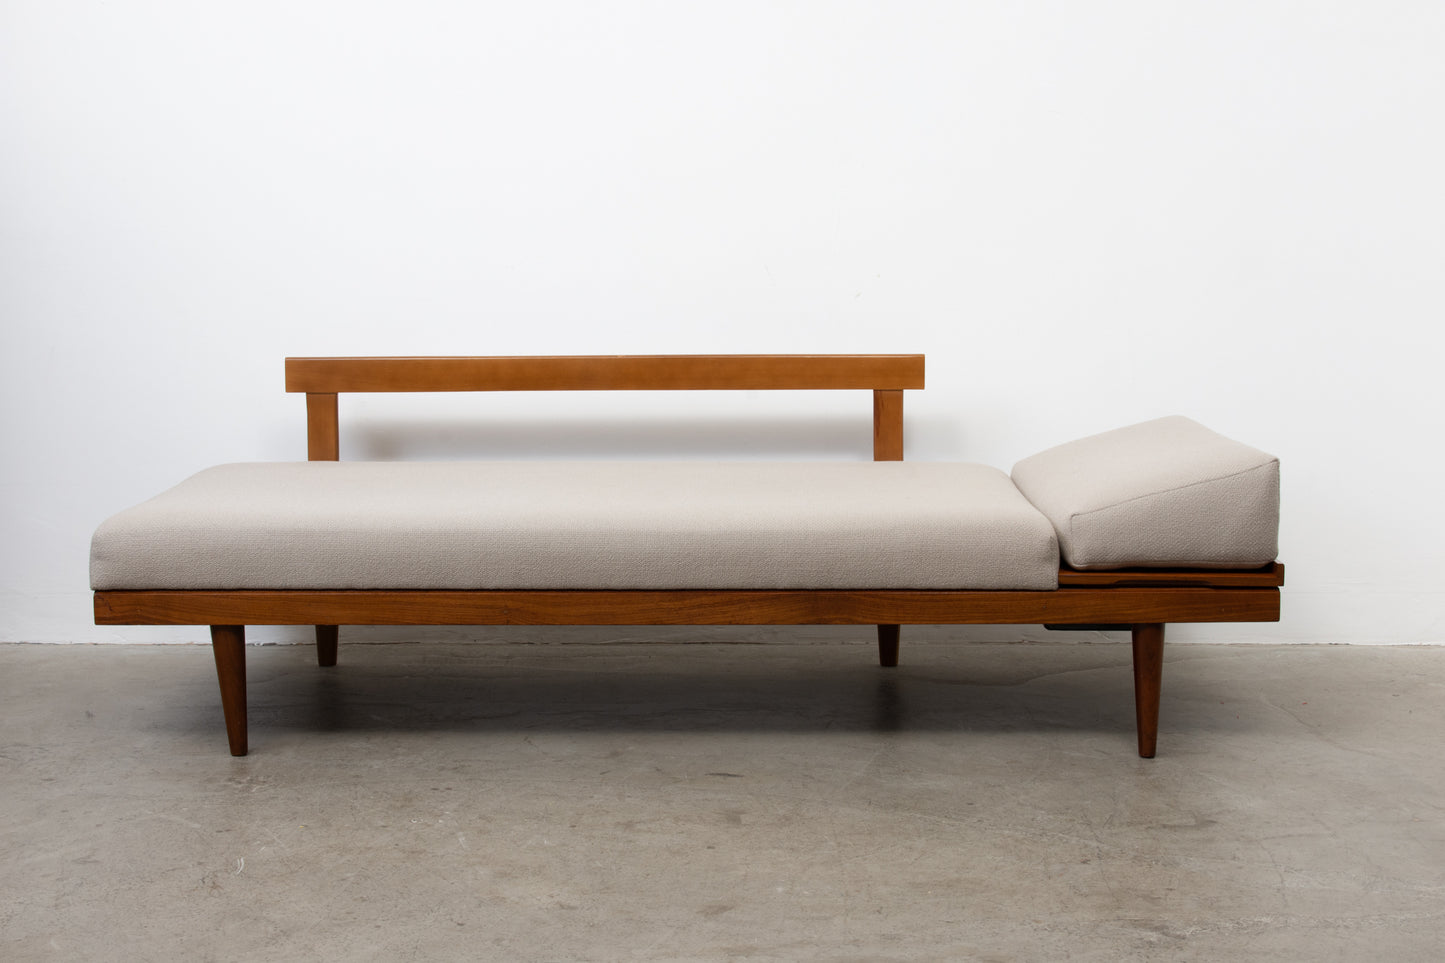 1960s 'Svane' day bed by Ingmar Relling